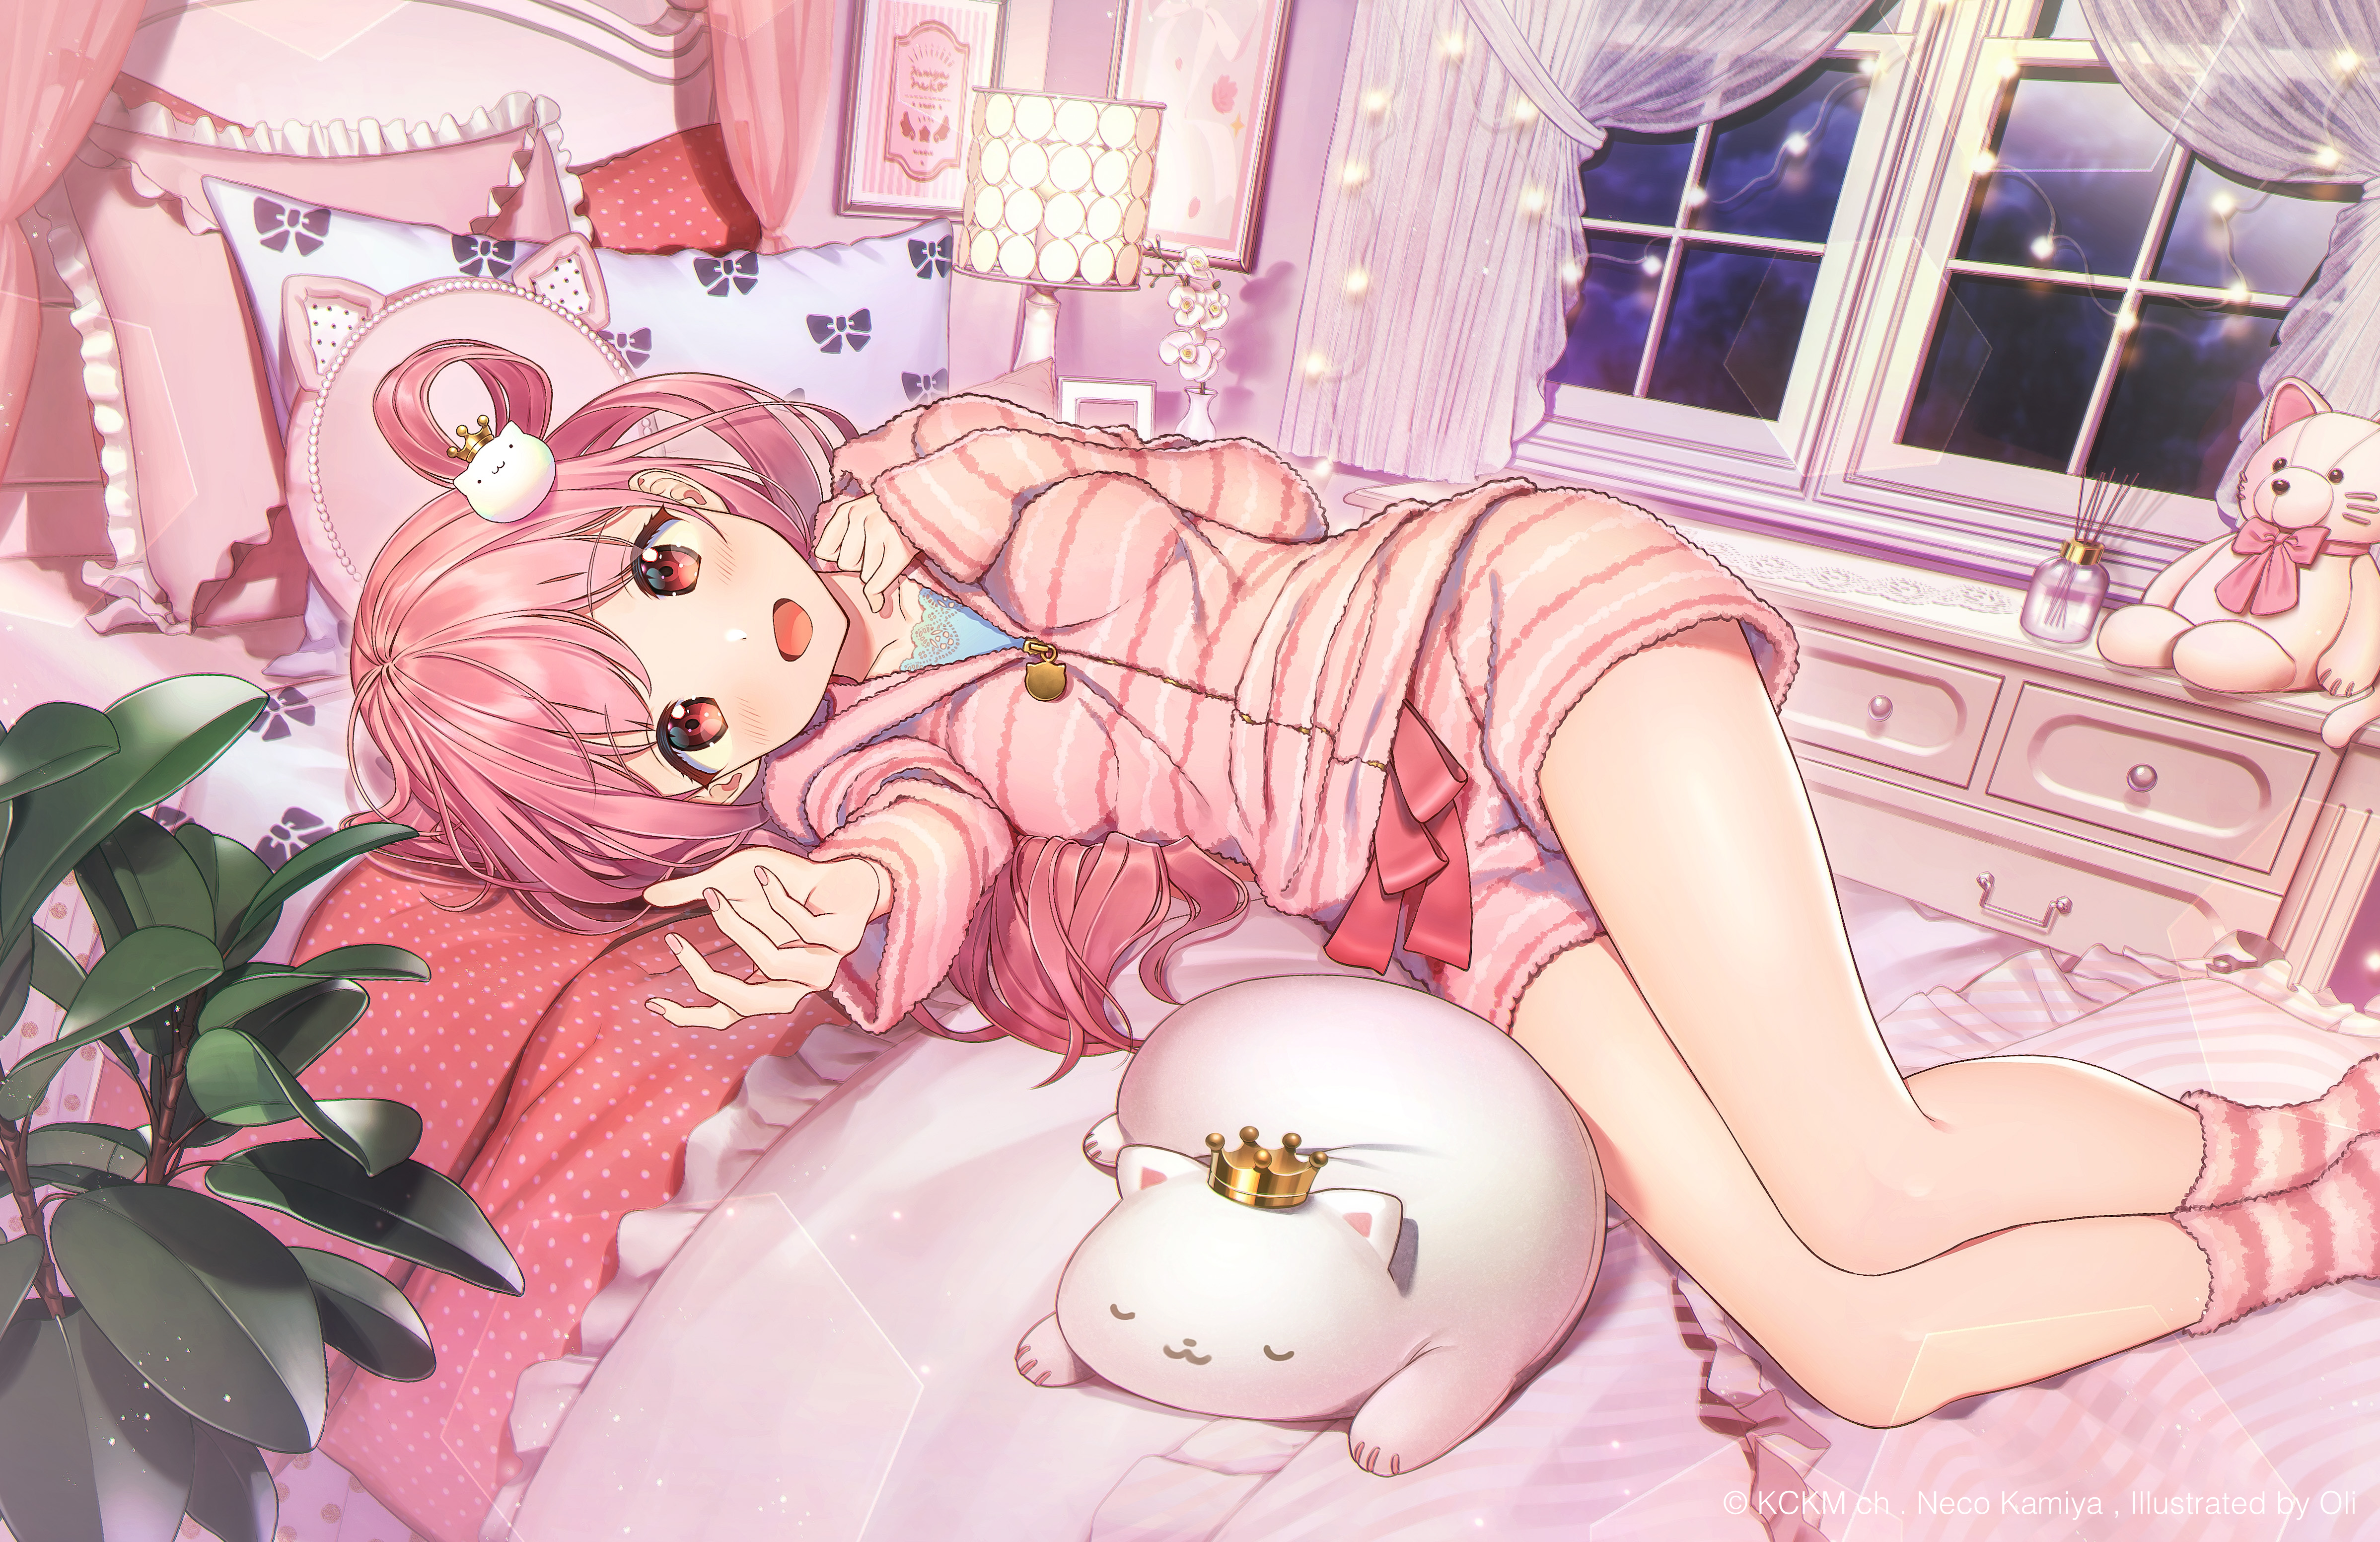 Anime Girls Red Eyes Pink Hair Open Mouth In Bed Oli Artist 4793x3105